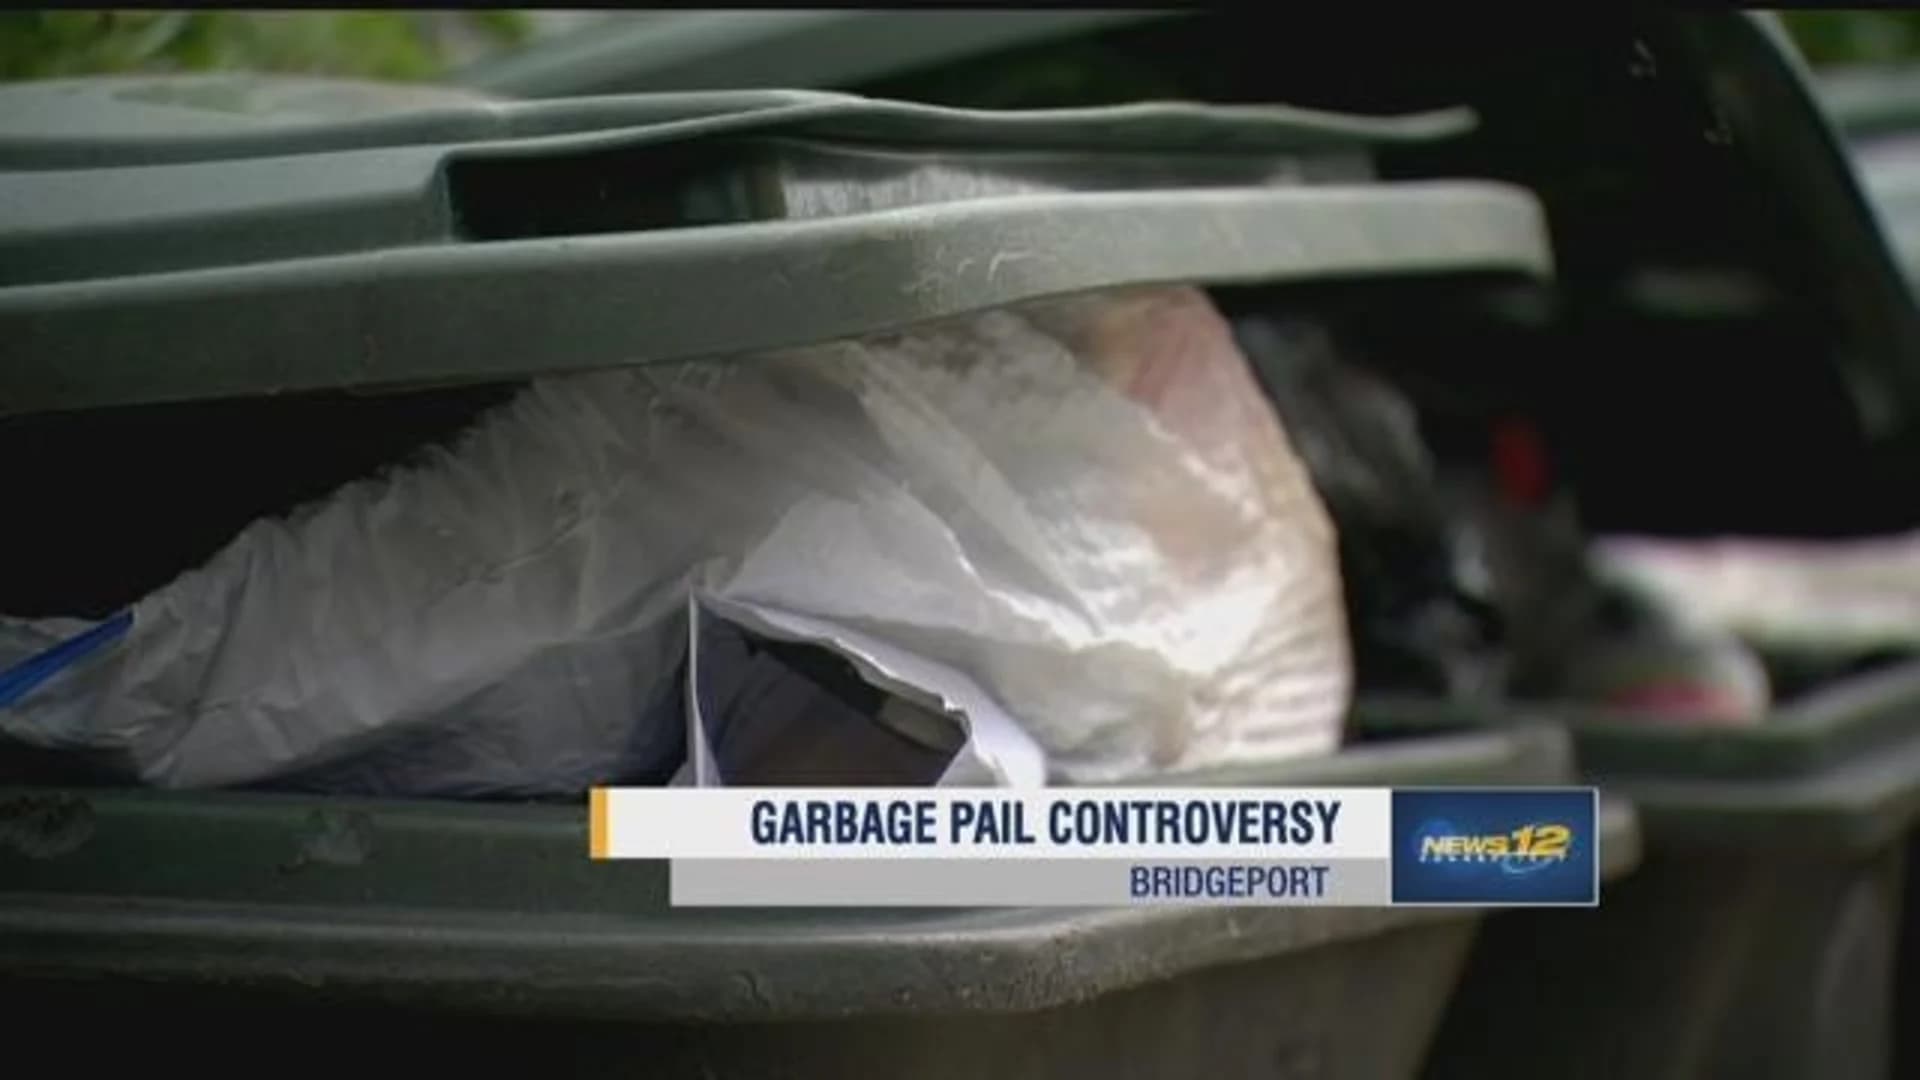 Bridgeport residents frustrated with garbage pail placement